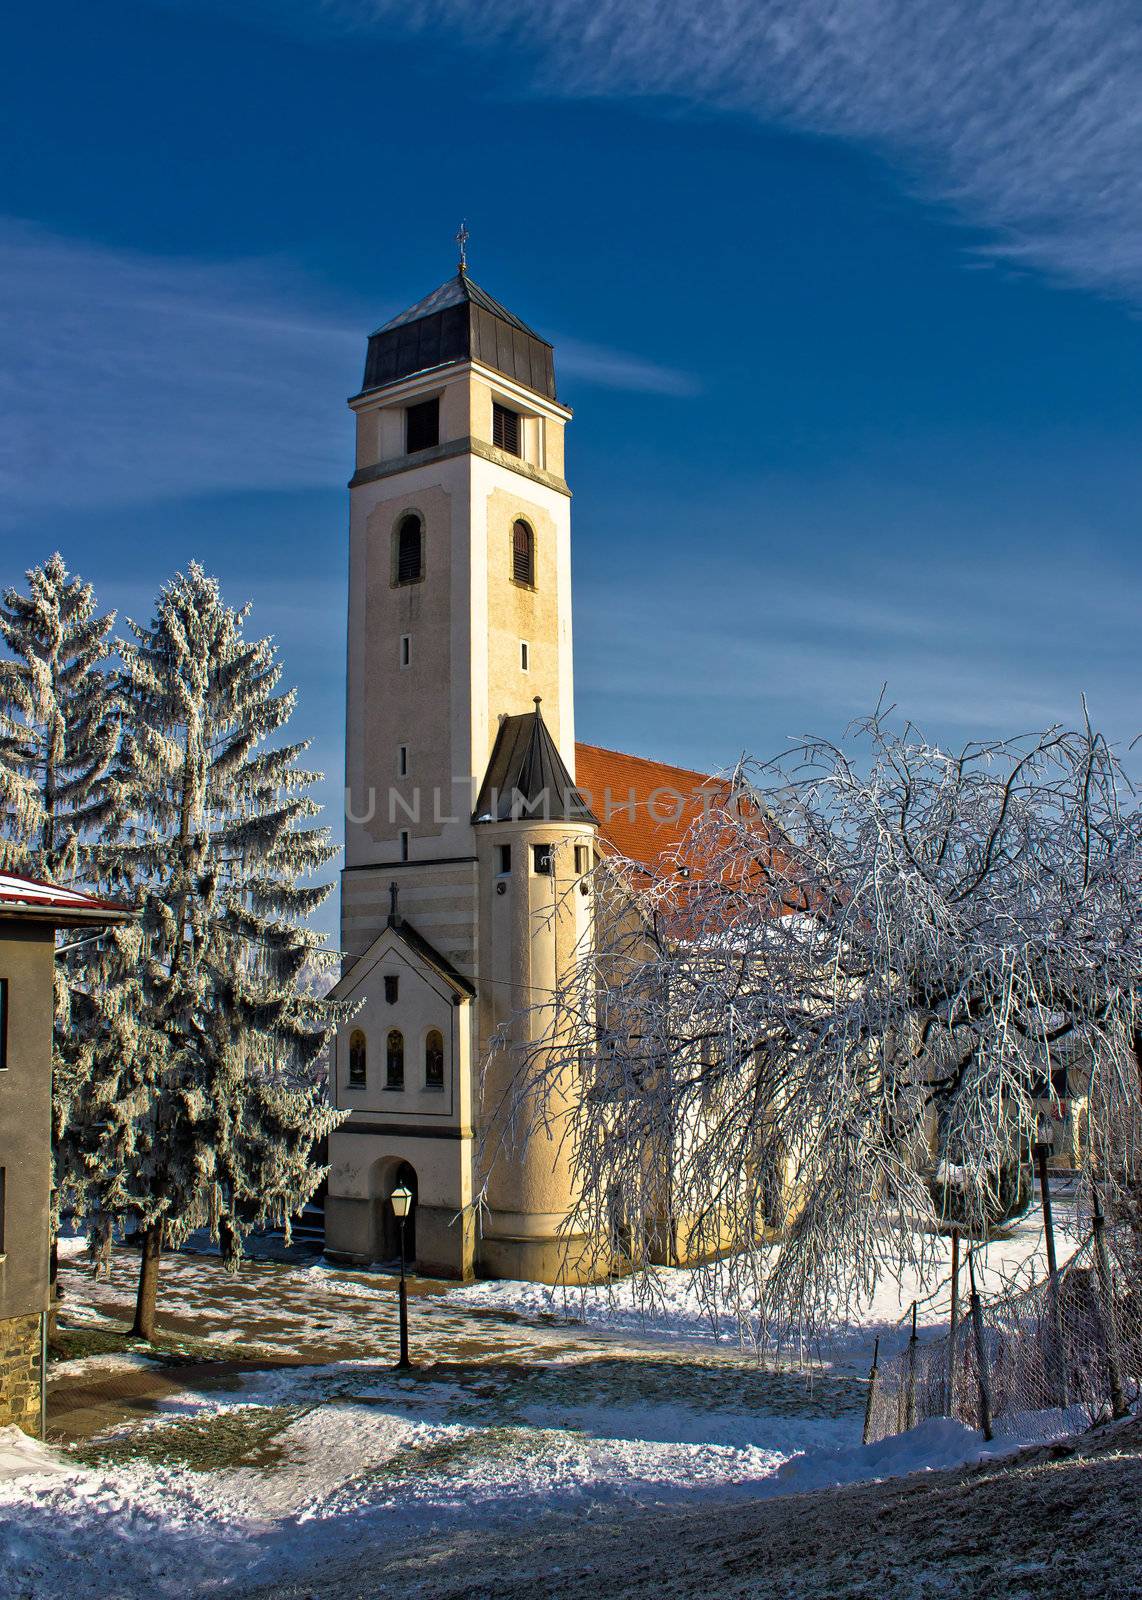 Church of holy cross in town of Krizevci, Croatia